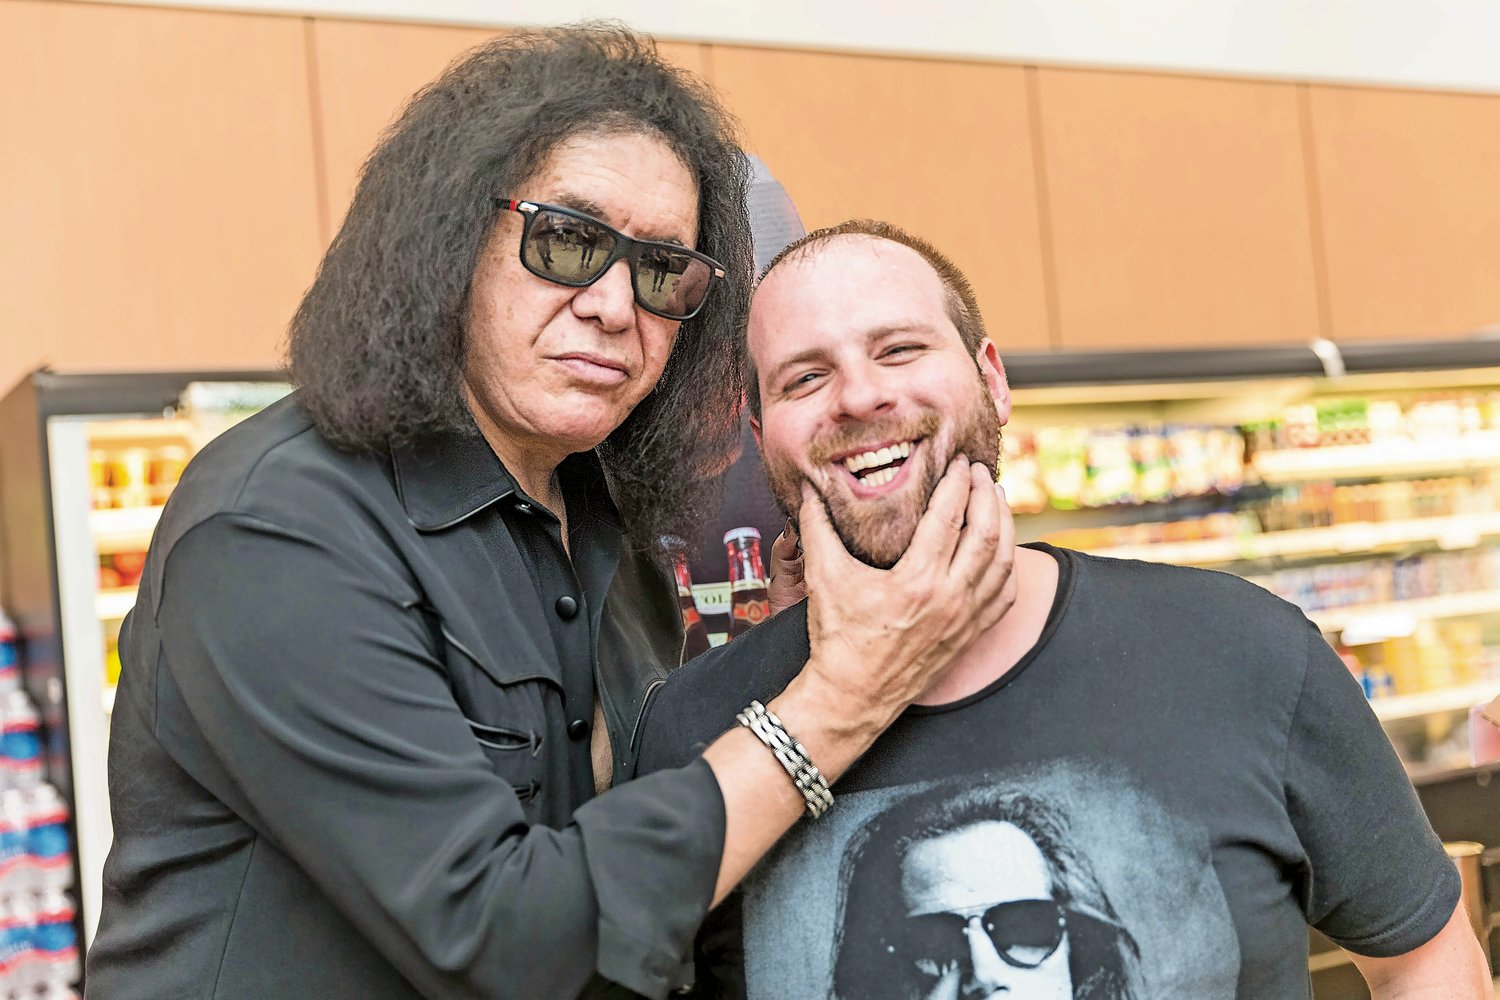 Bellmore native Darren Paltrowitz, above with Gene Simmons of Kiss, has kept busy during the pandemic by interviewing musicians, actors, comedians, athletes and other personalities for his podcast “Paltrocast With Darren Paltrowitz.”